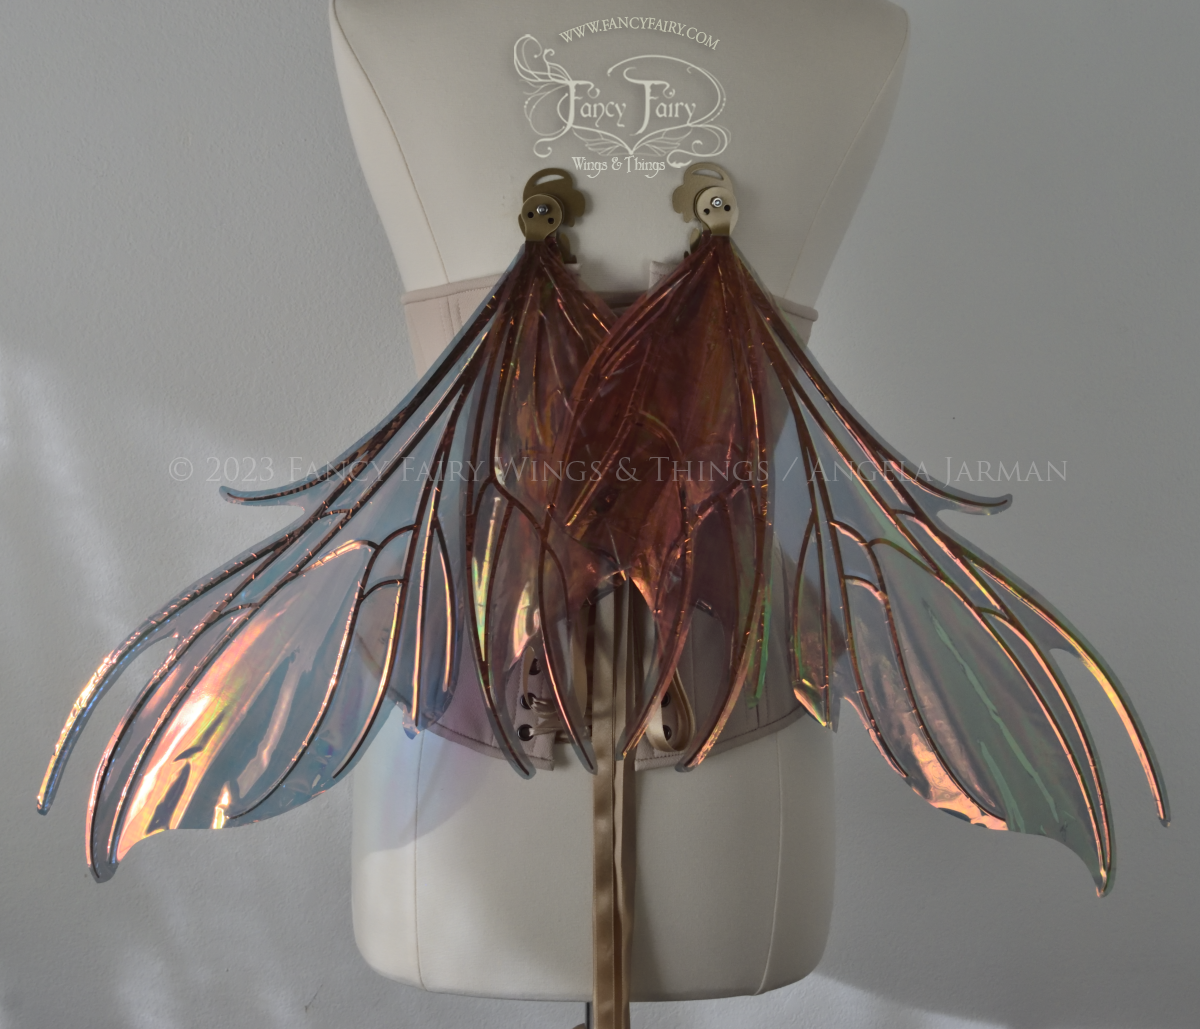 Back view of iridescent orange & dark grey/blue fairy wings with spikey veins, in resting position, worn by a dress form